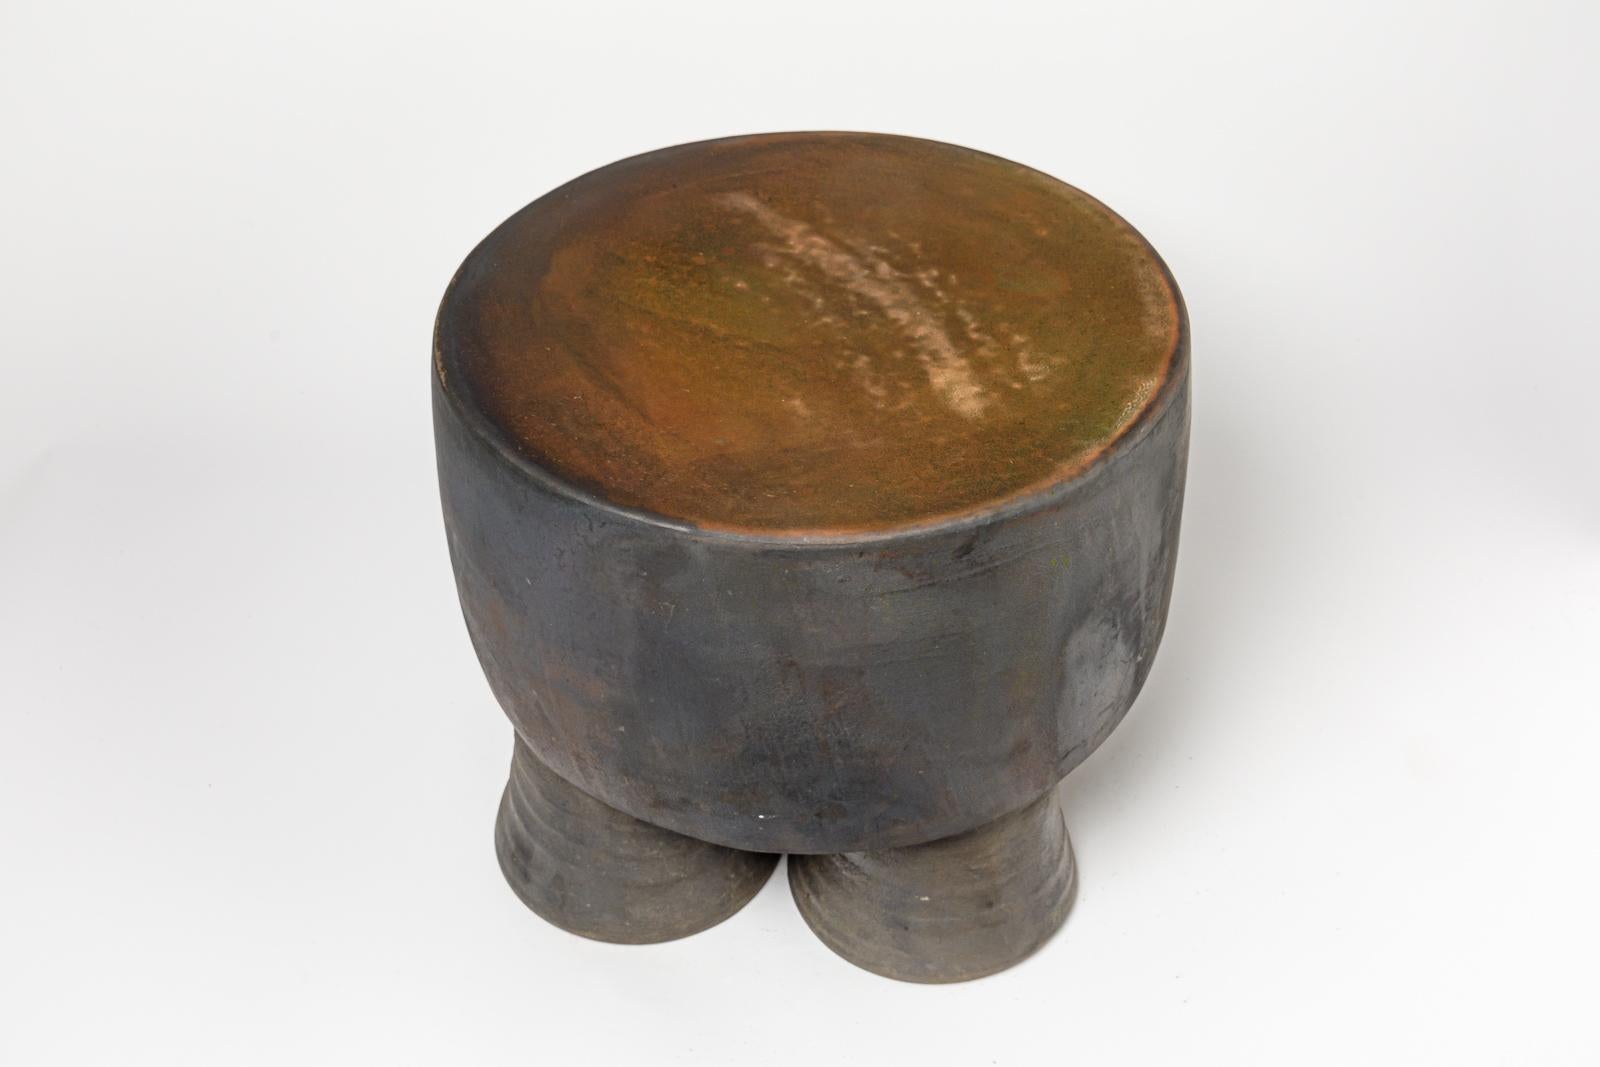 Contemporary Black and ocher glazed ceramic stool or coffee table by Mia Jensen, 2023. For Sale